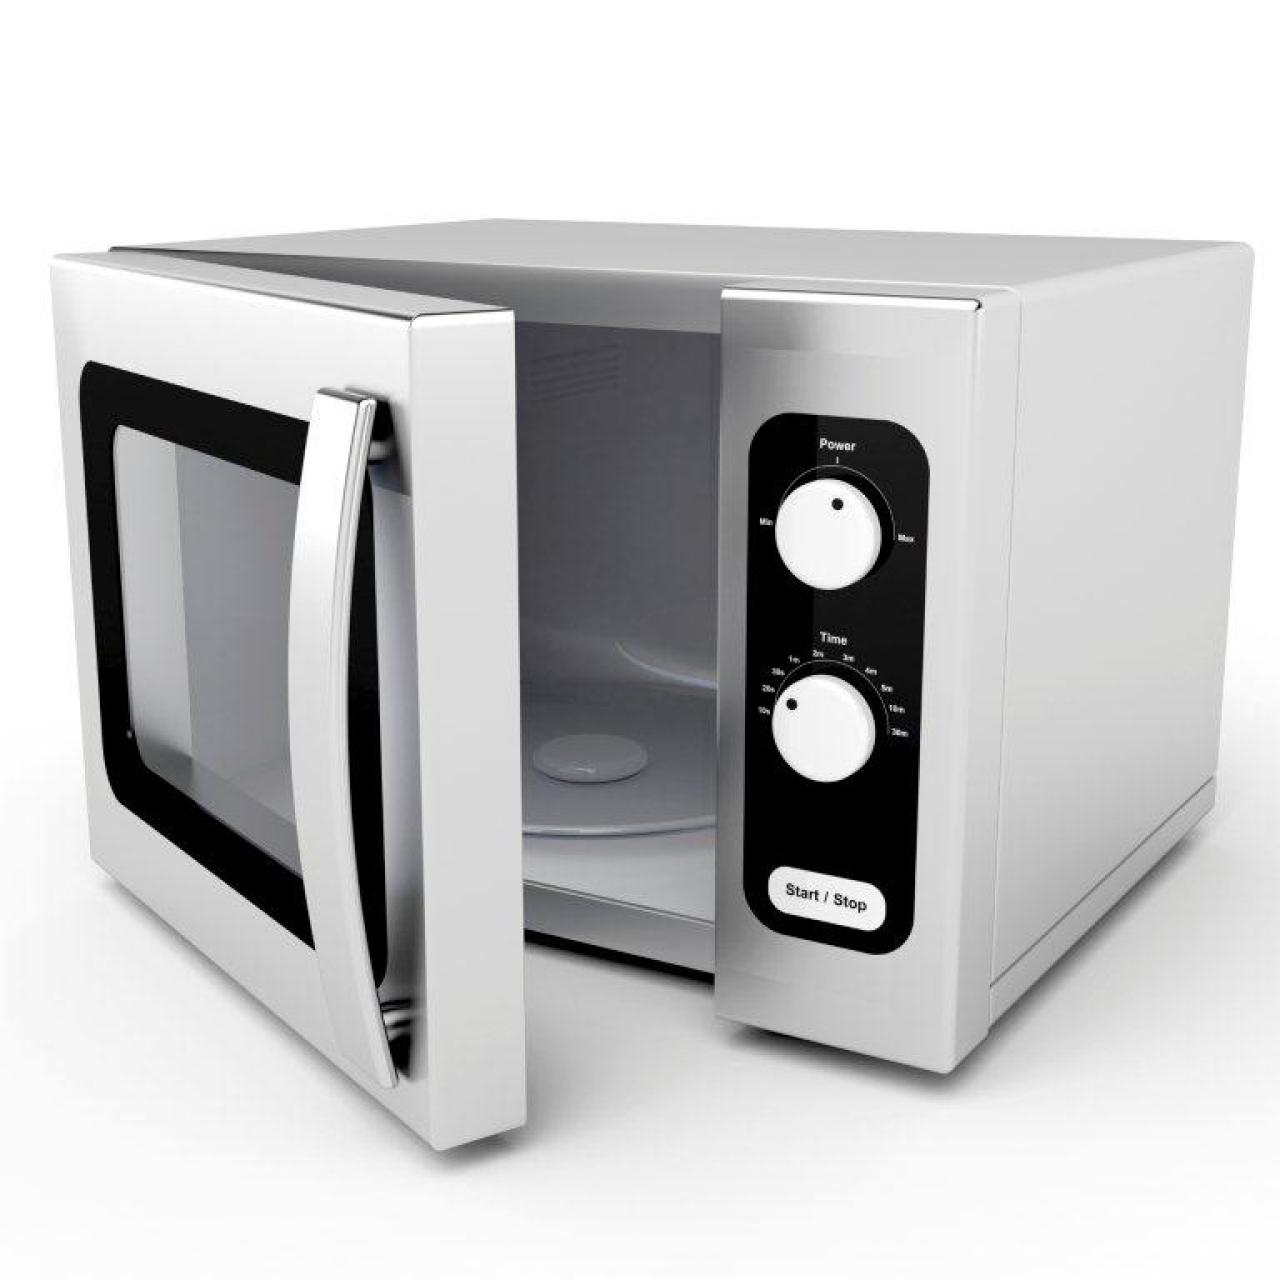 Healthy Microwave Recipes - Healthy Food Guide